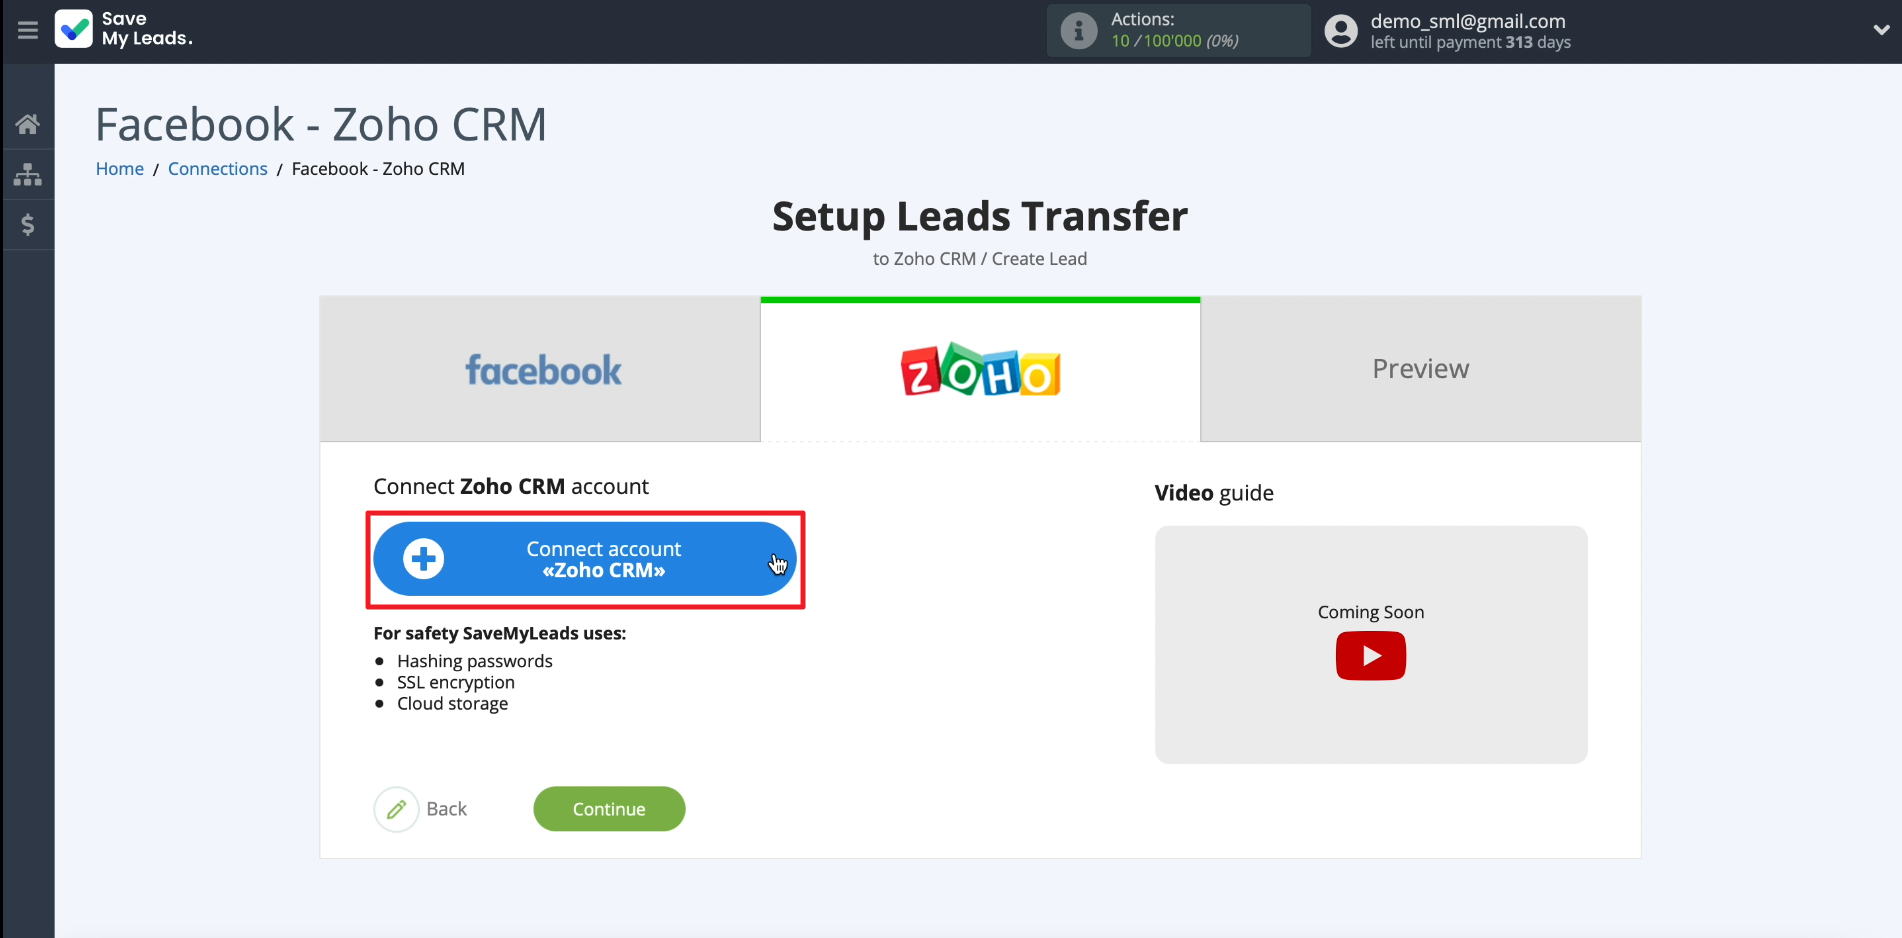 How to set up the upload of new leads from your Facebook ad account to Zoho CRM | Connect your Zoho CRM account